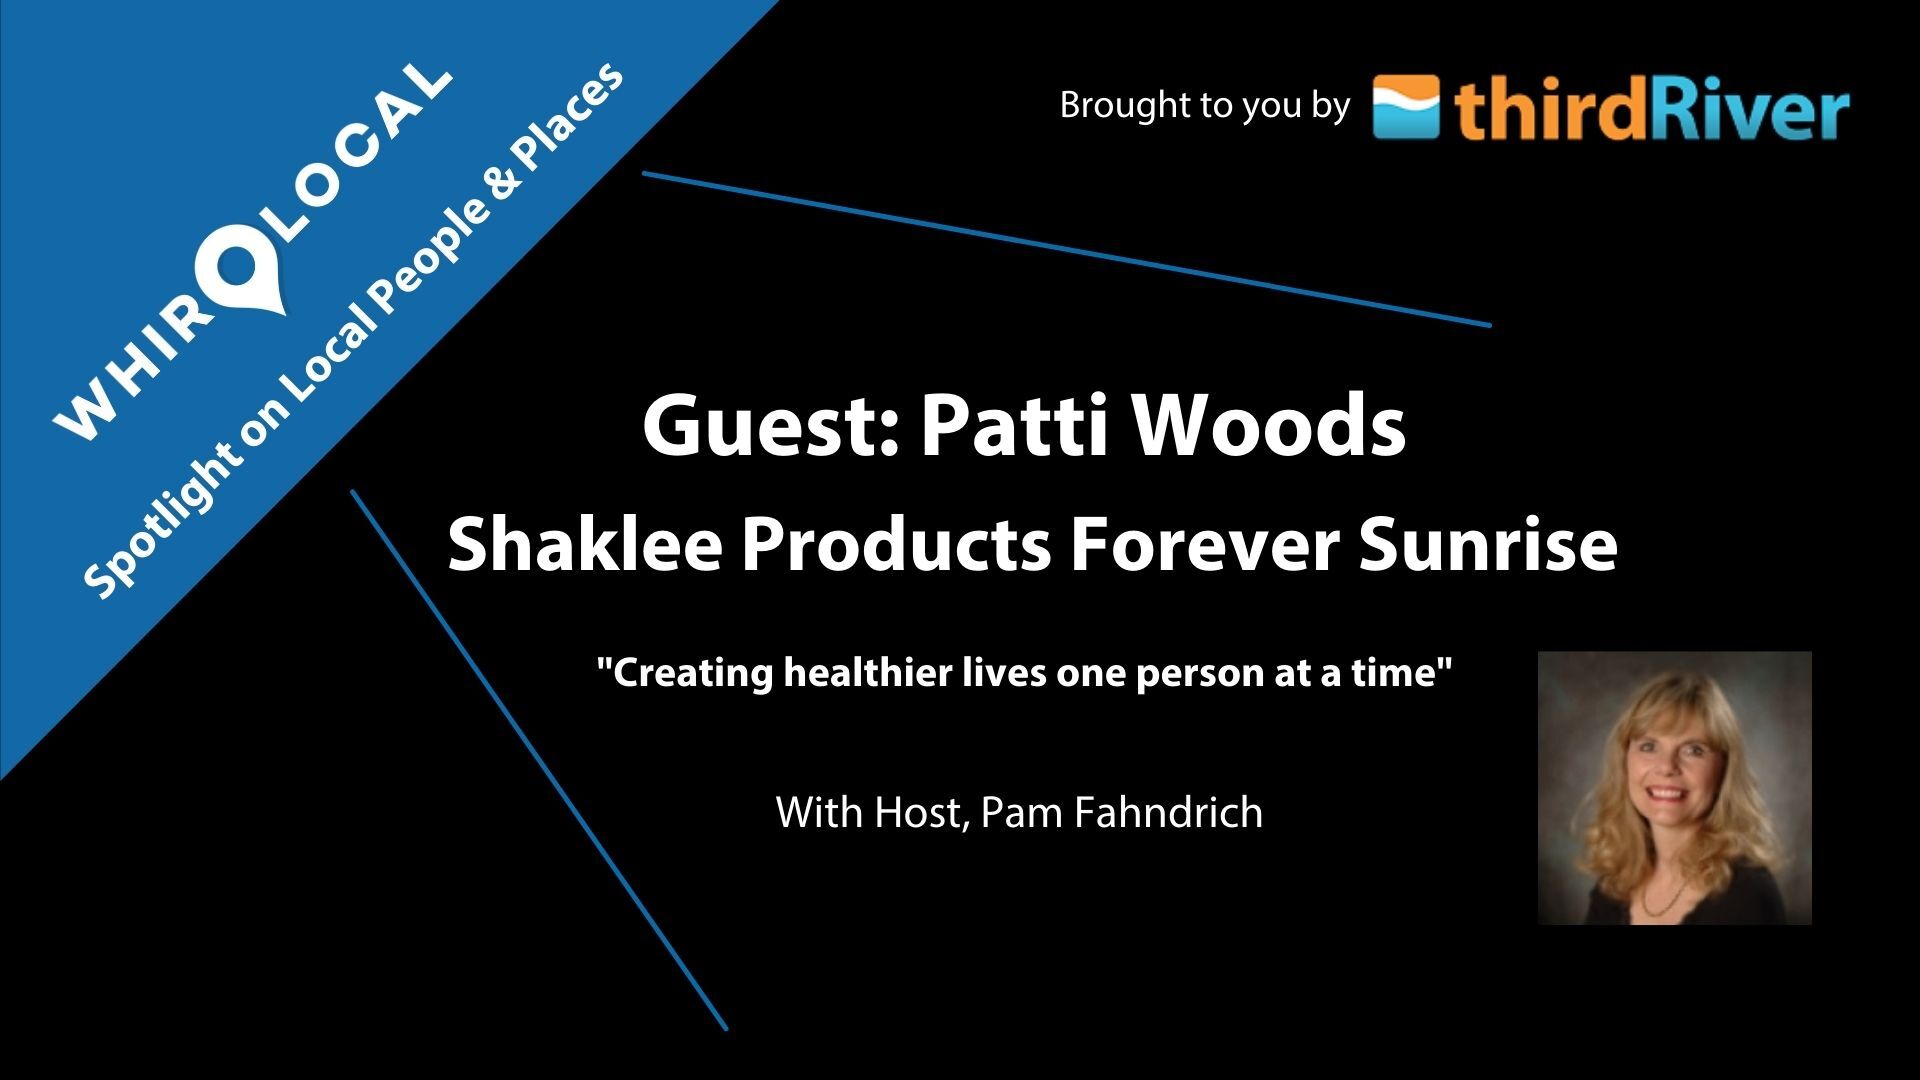 Meet Patti Woods with Shaklee Products Forever Sunrise